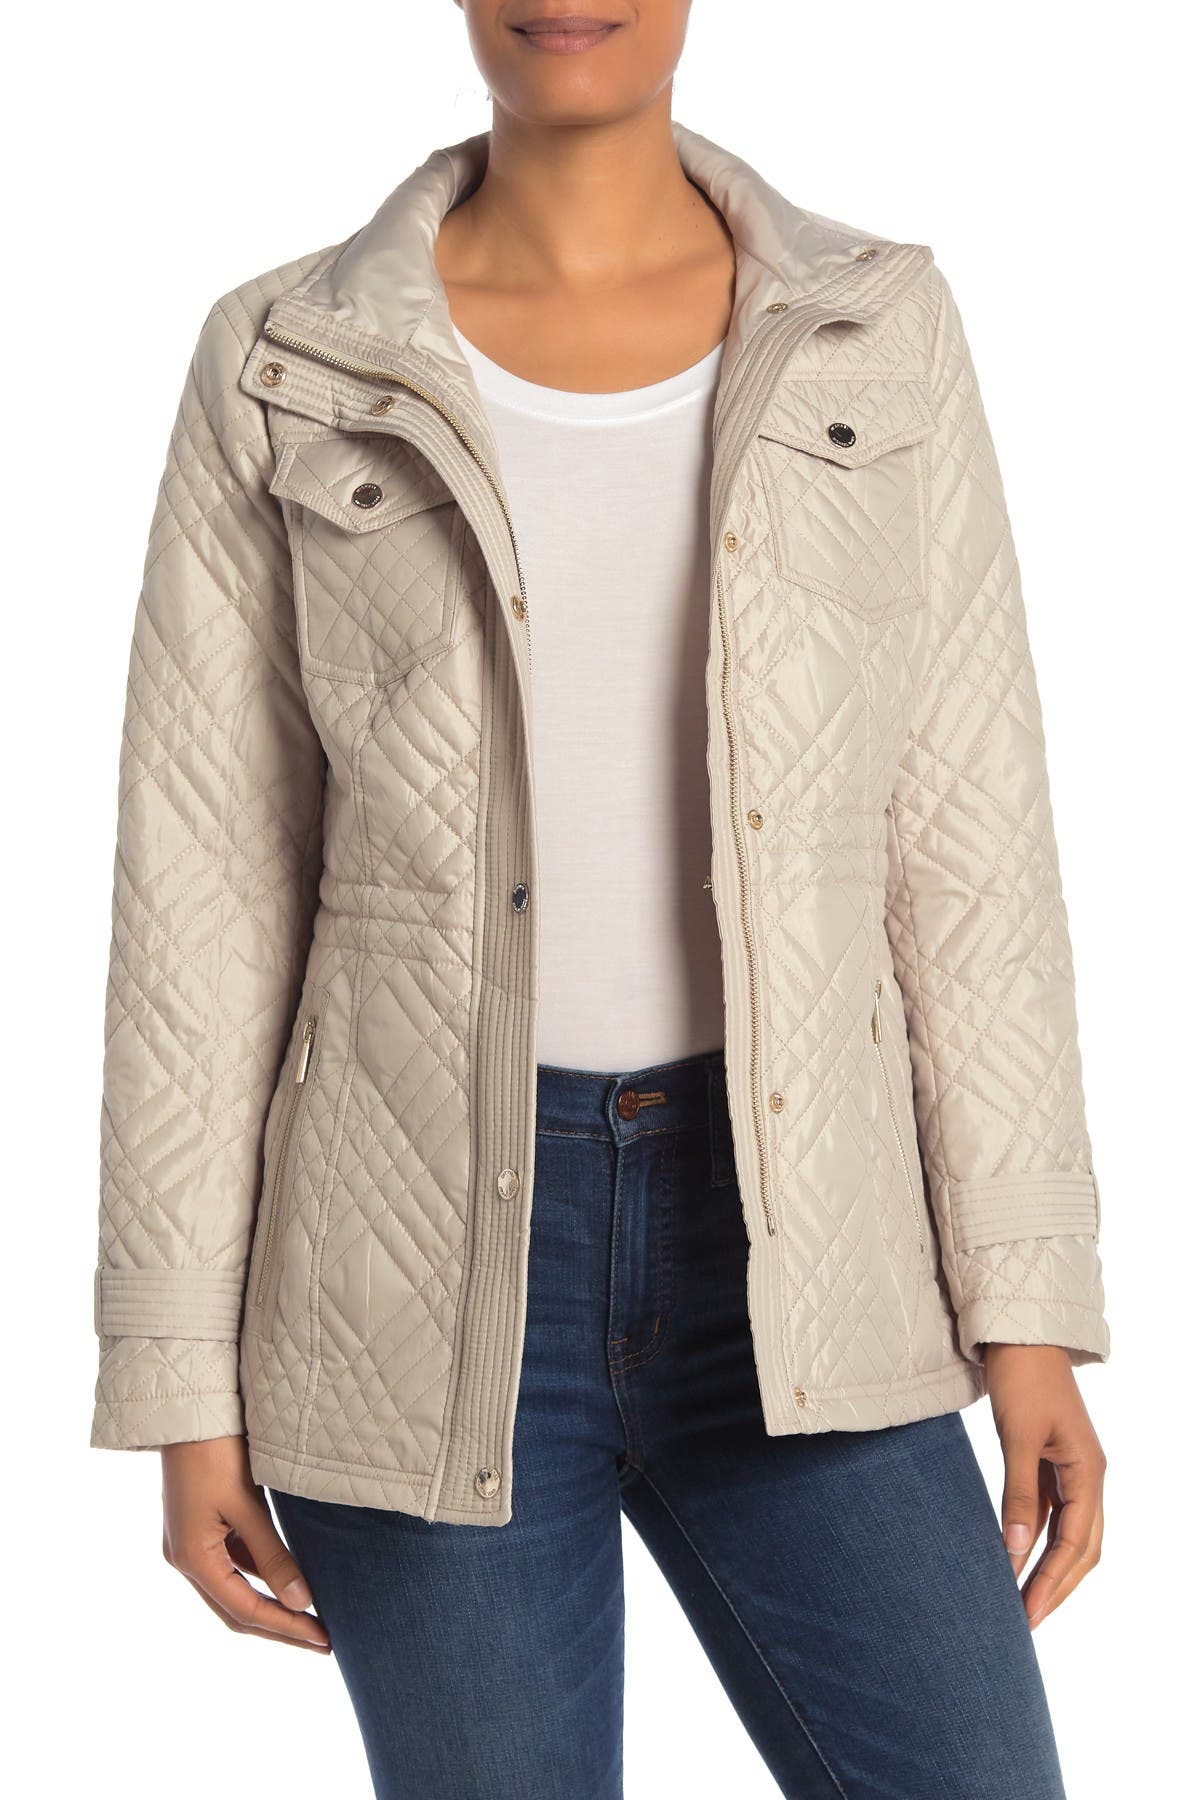 michael kors quilted anorak